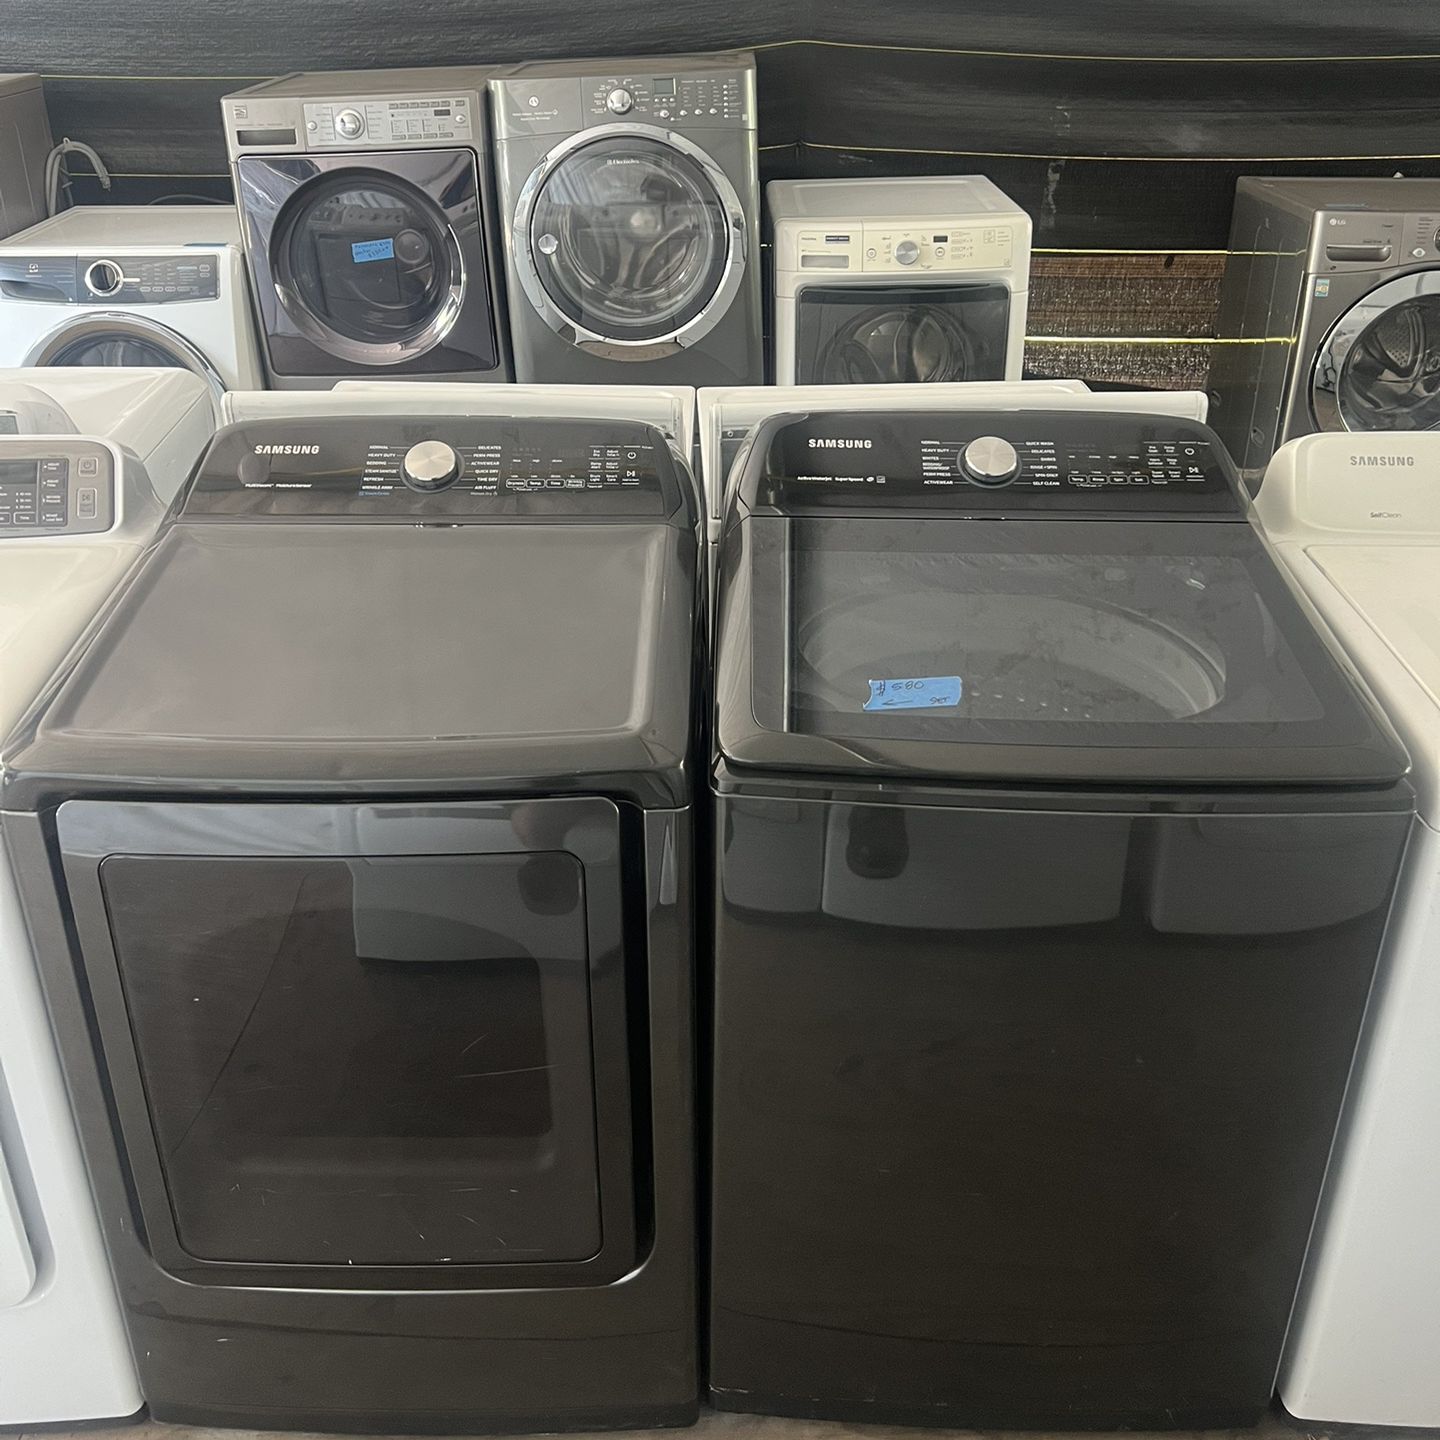 Samsung Washer&dryer Large Capacity Set   60 day warranty/ Located at:📍5415 Carmack Rd Tampa Fl 33610📍